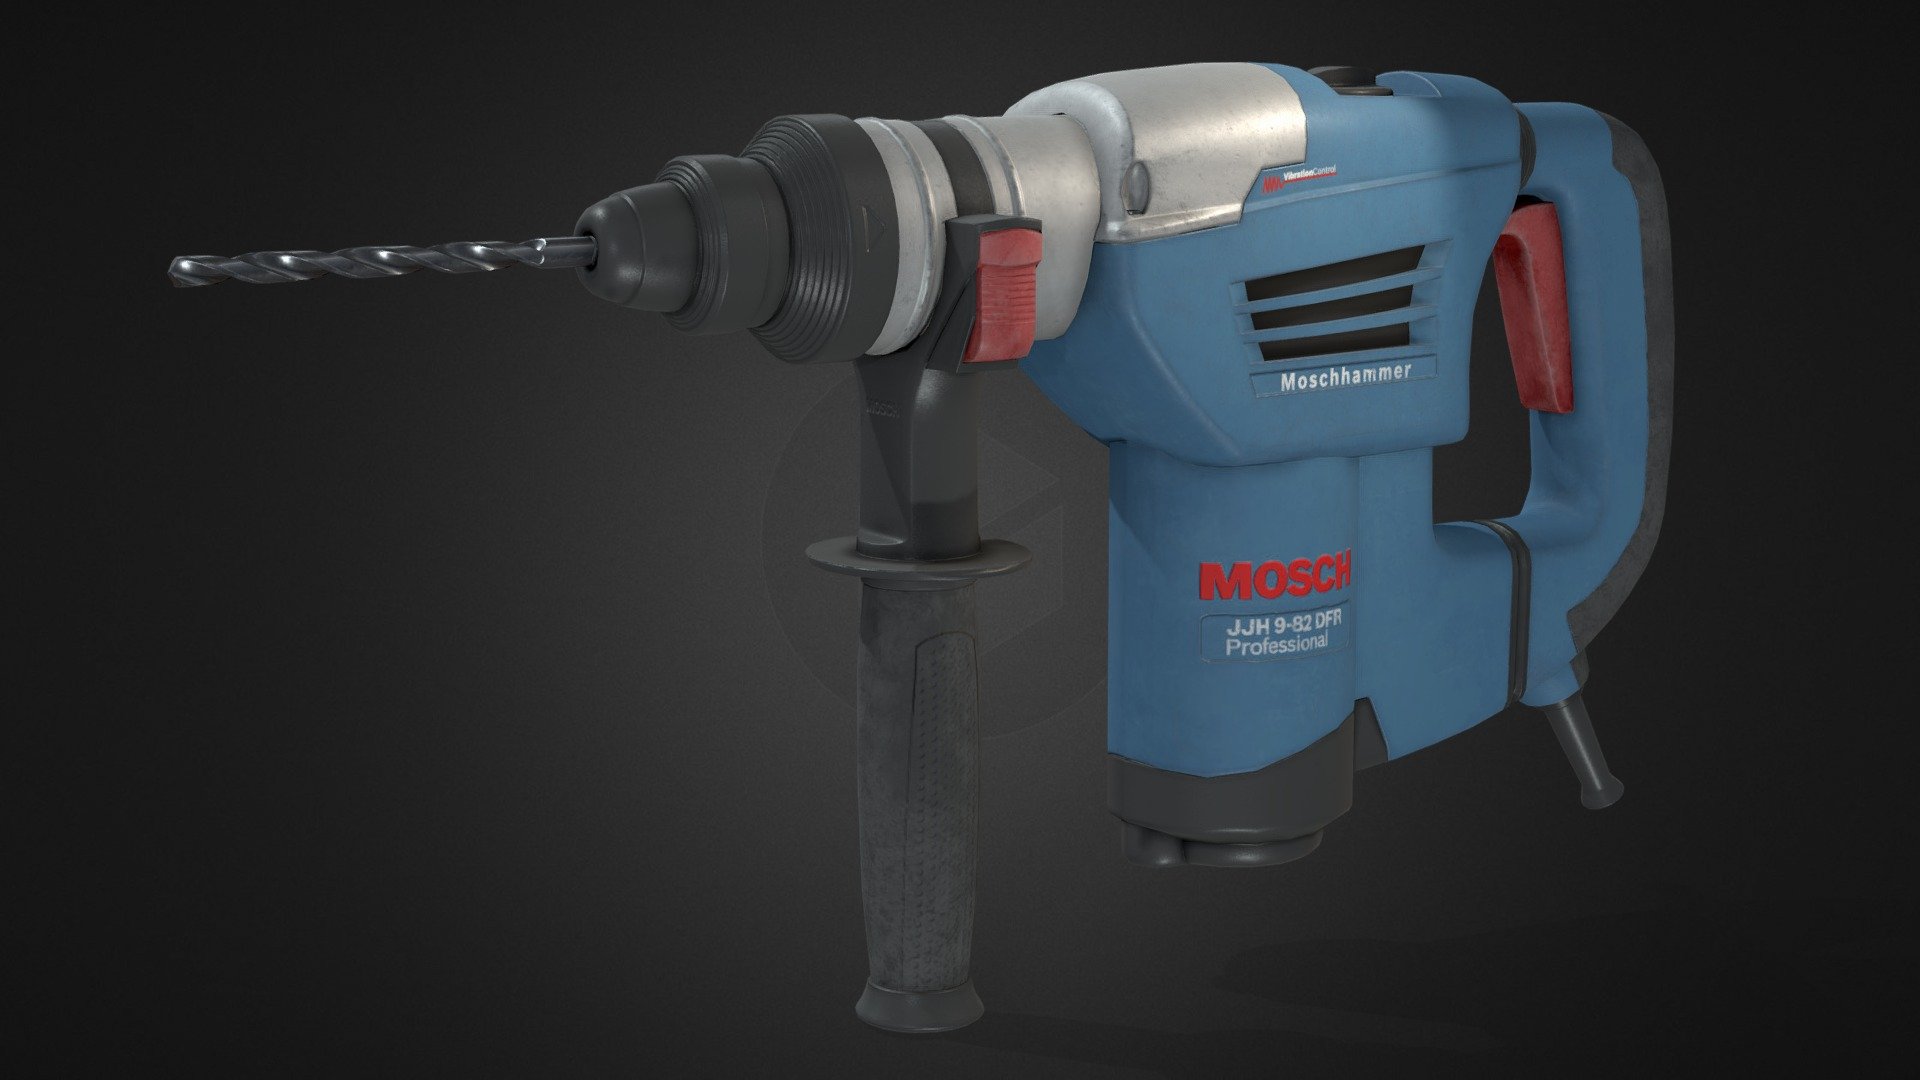 Hammer drill, modelled in 3ds max and textures in Substance Painter

Download it for free and use in your projects! - Hammer drill - Download Free 3D model by Jinhong Jeong (@JinhongJeong) 3d model